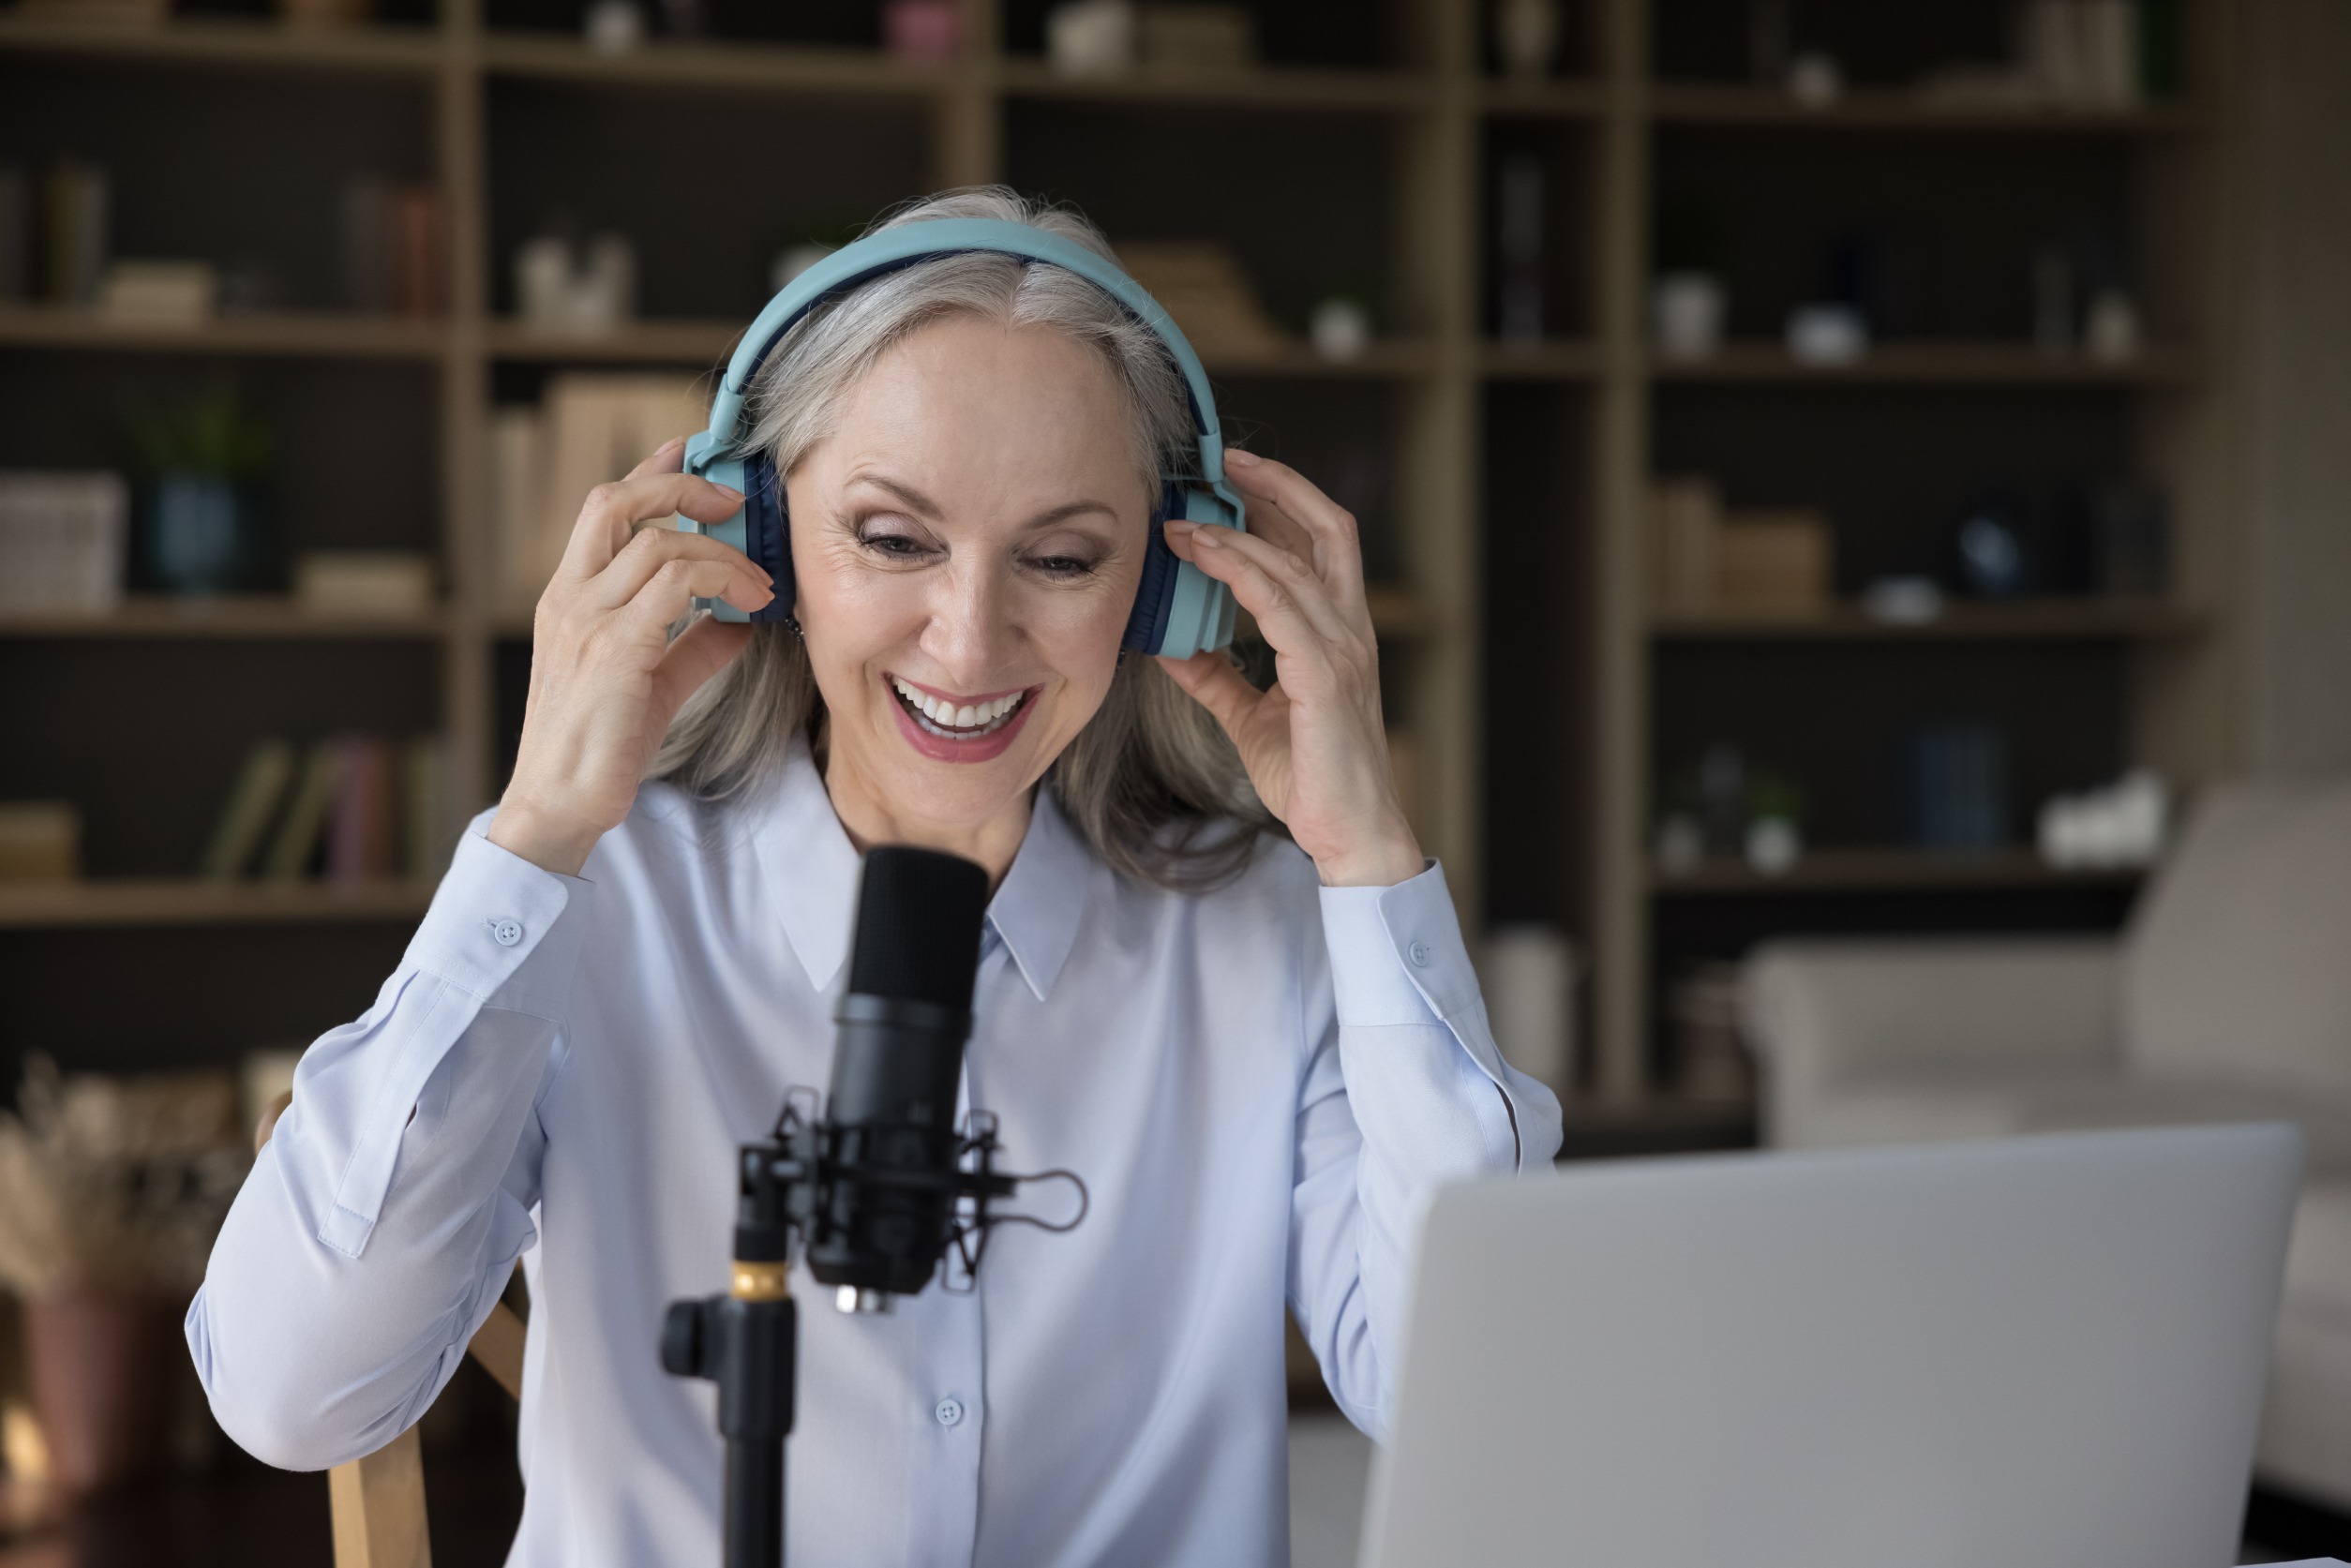 Mature woman hosting a podcast using a microphone and headphones.